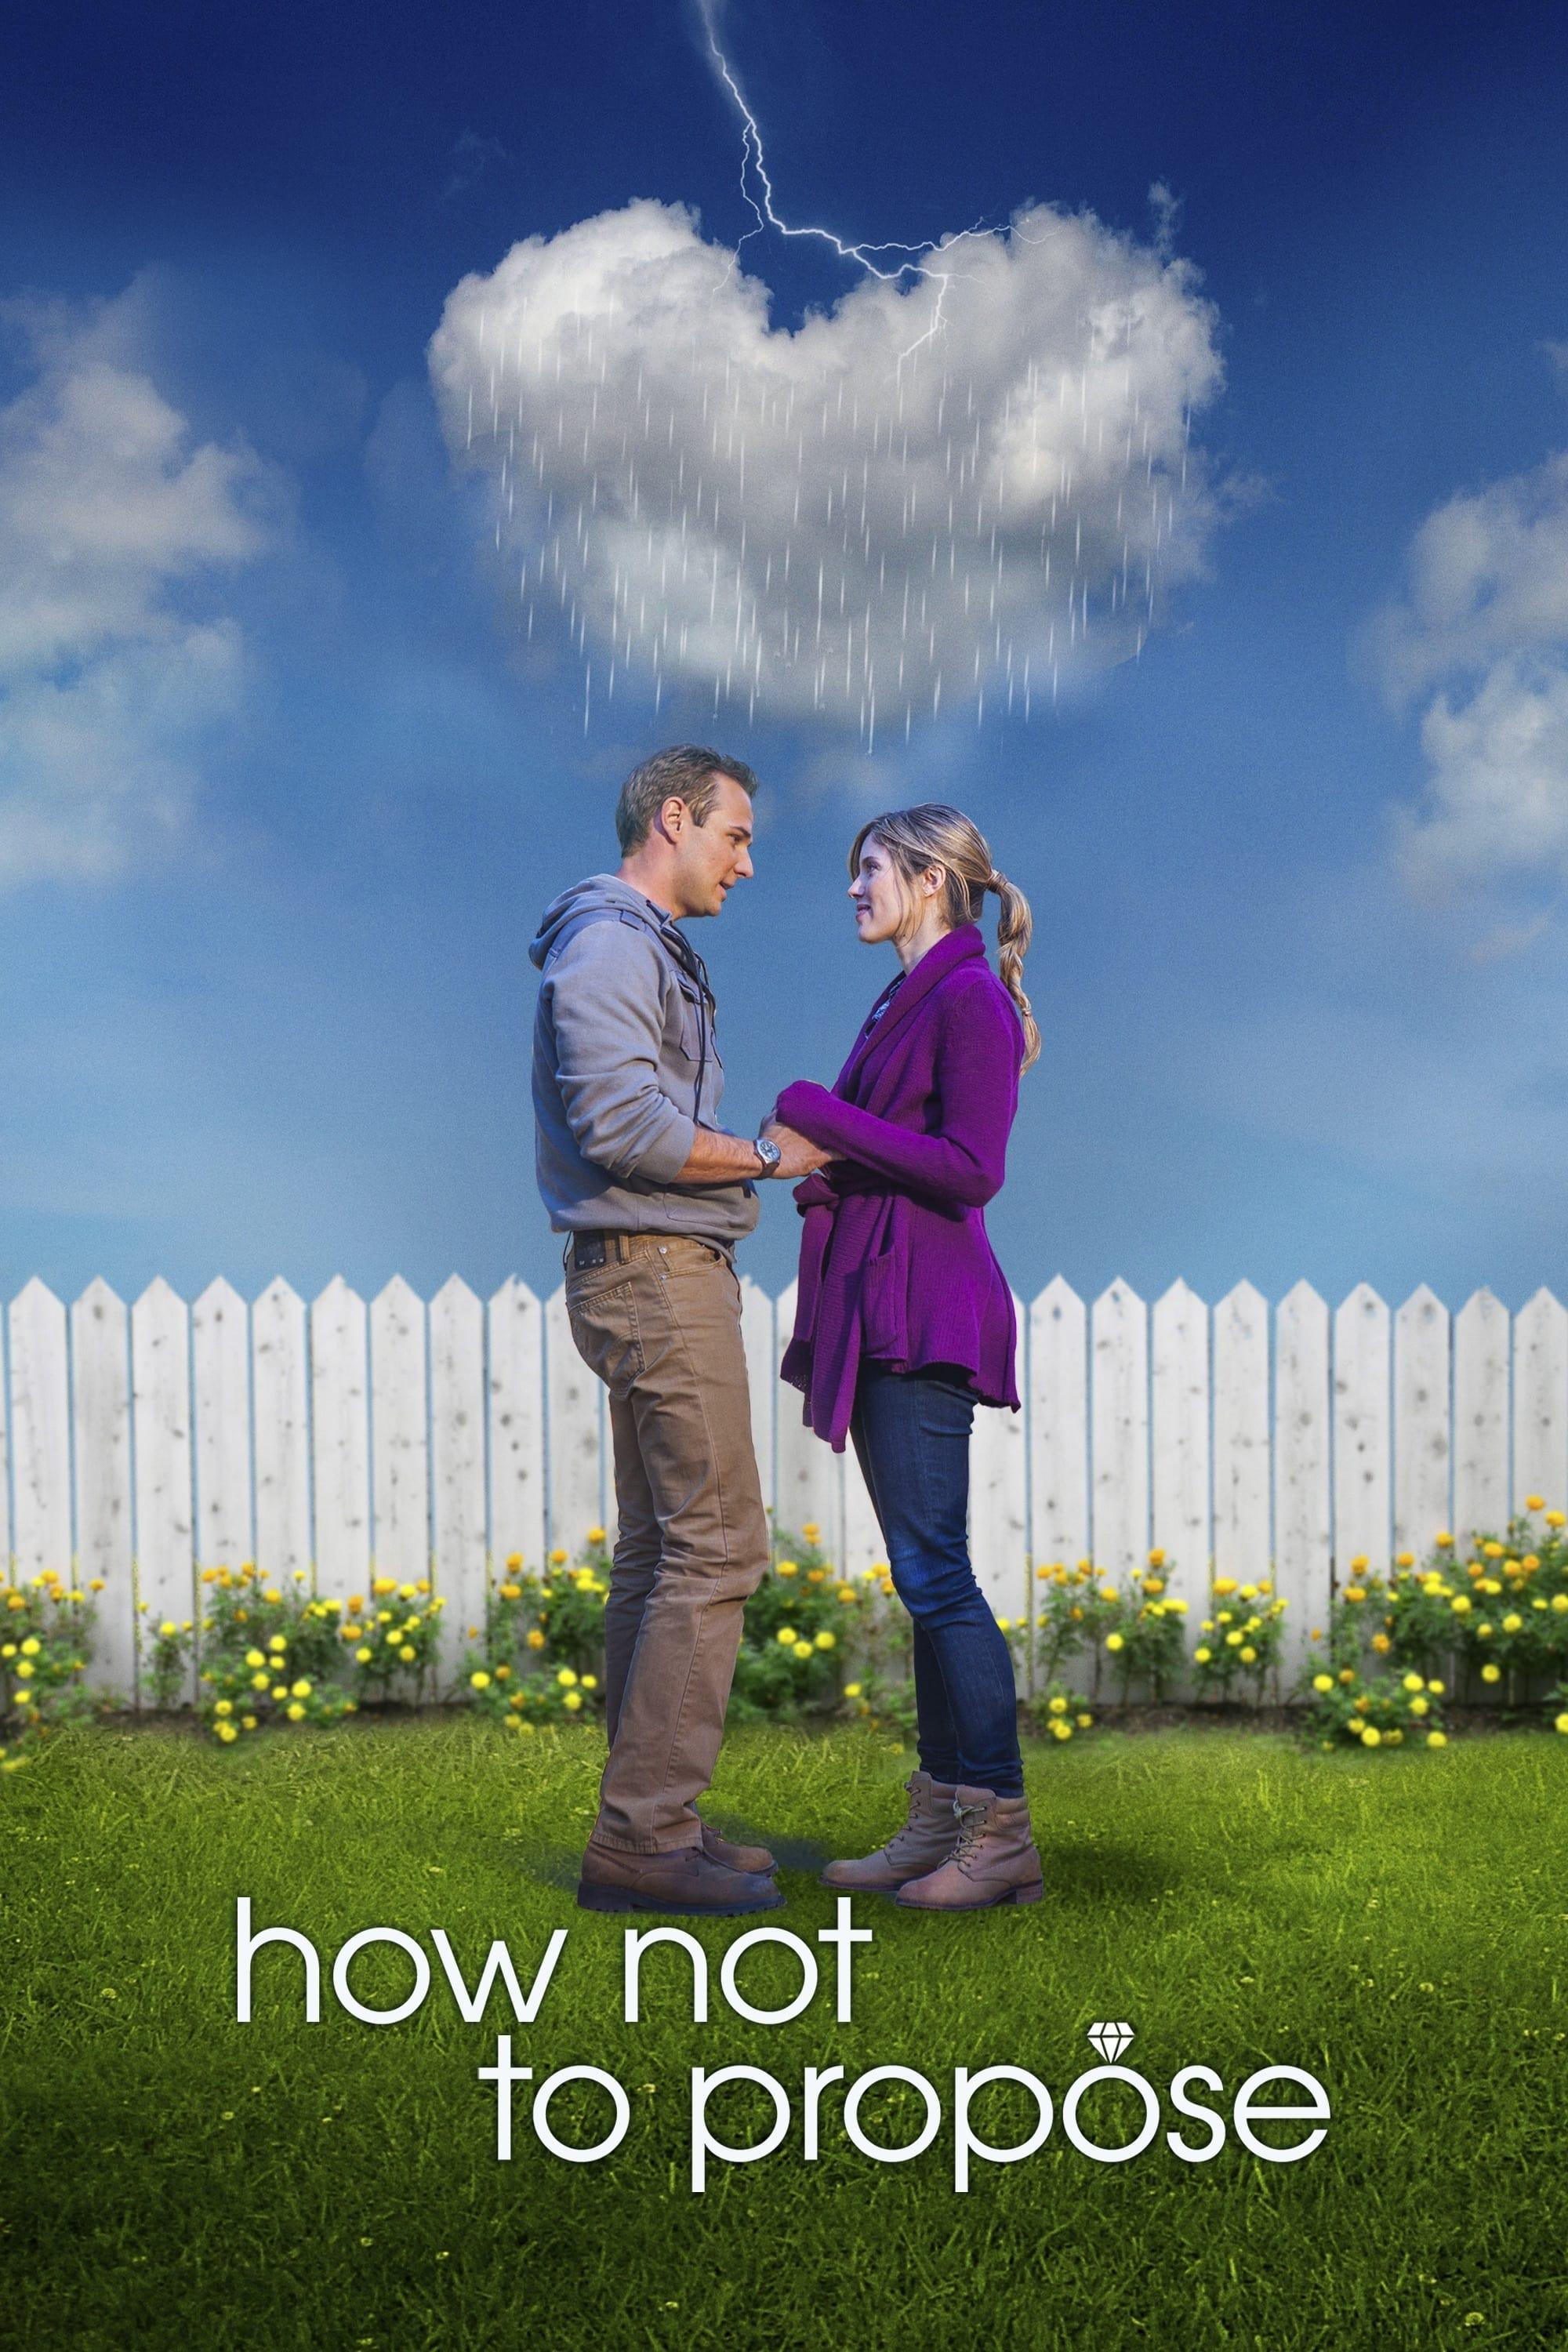 How Not to Propose poster